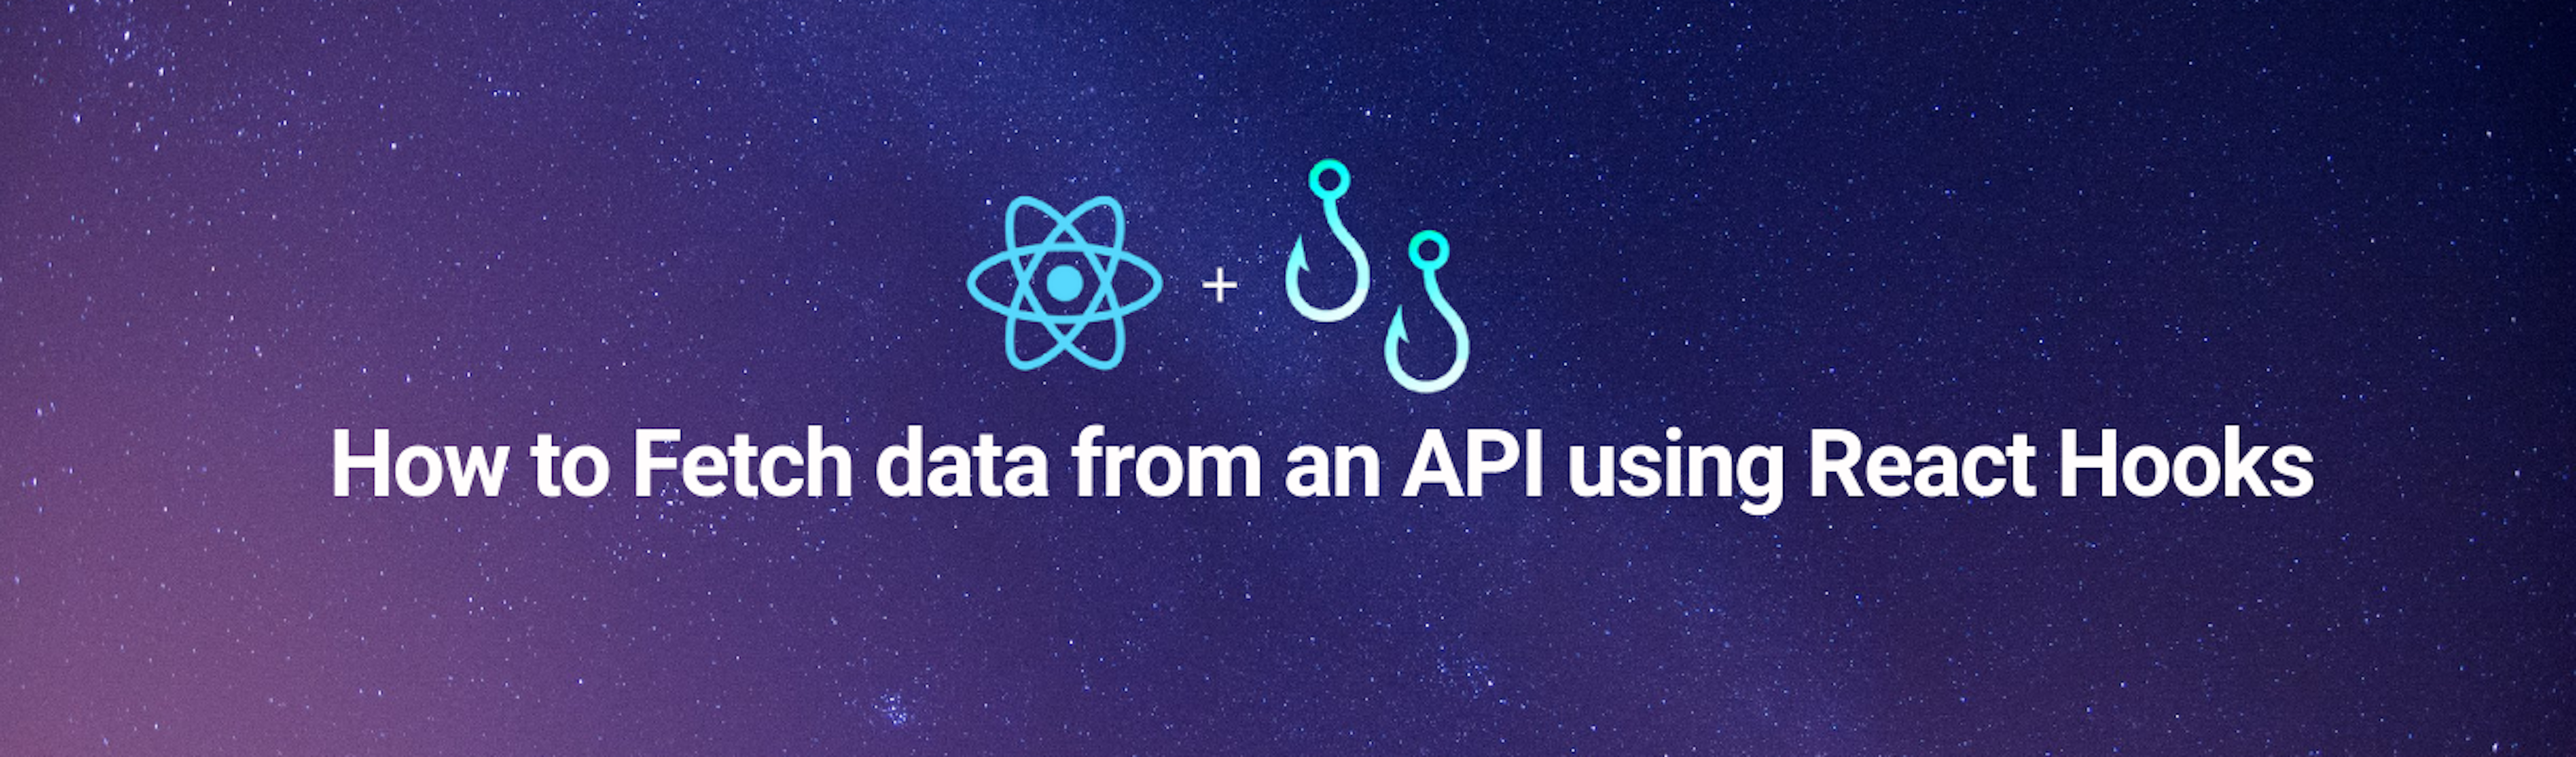 How to Fetch Data From an API Using React Hooks